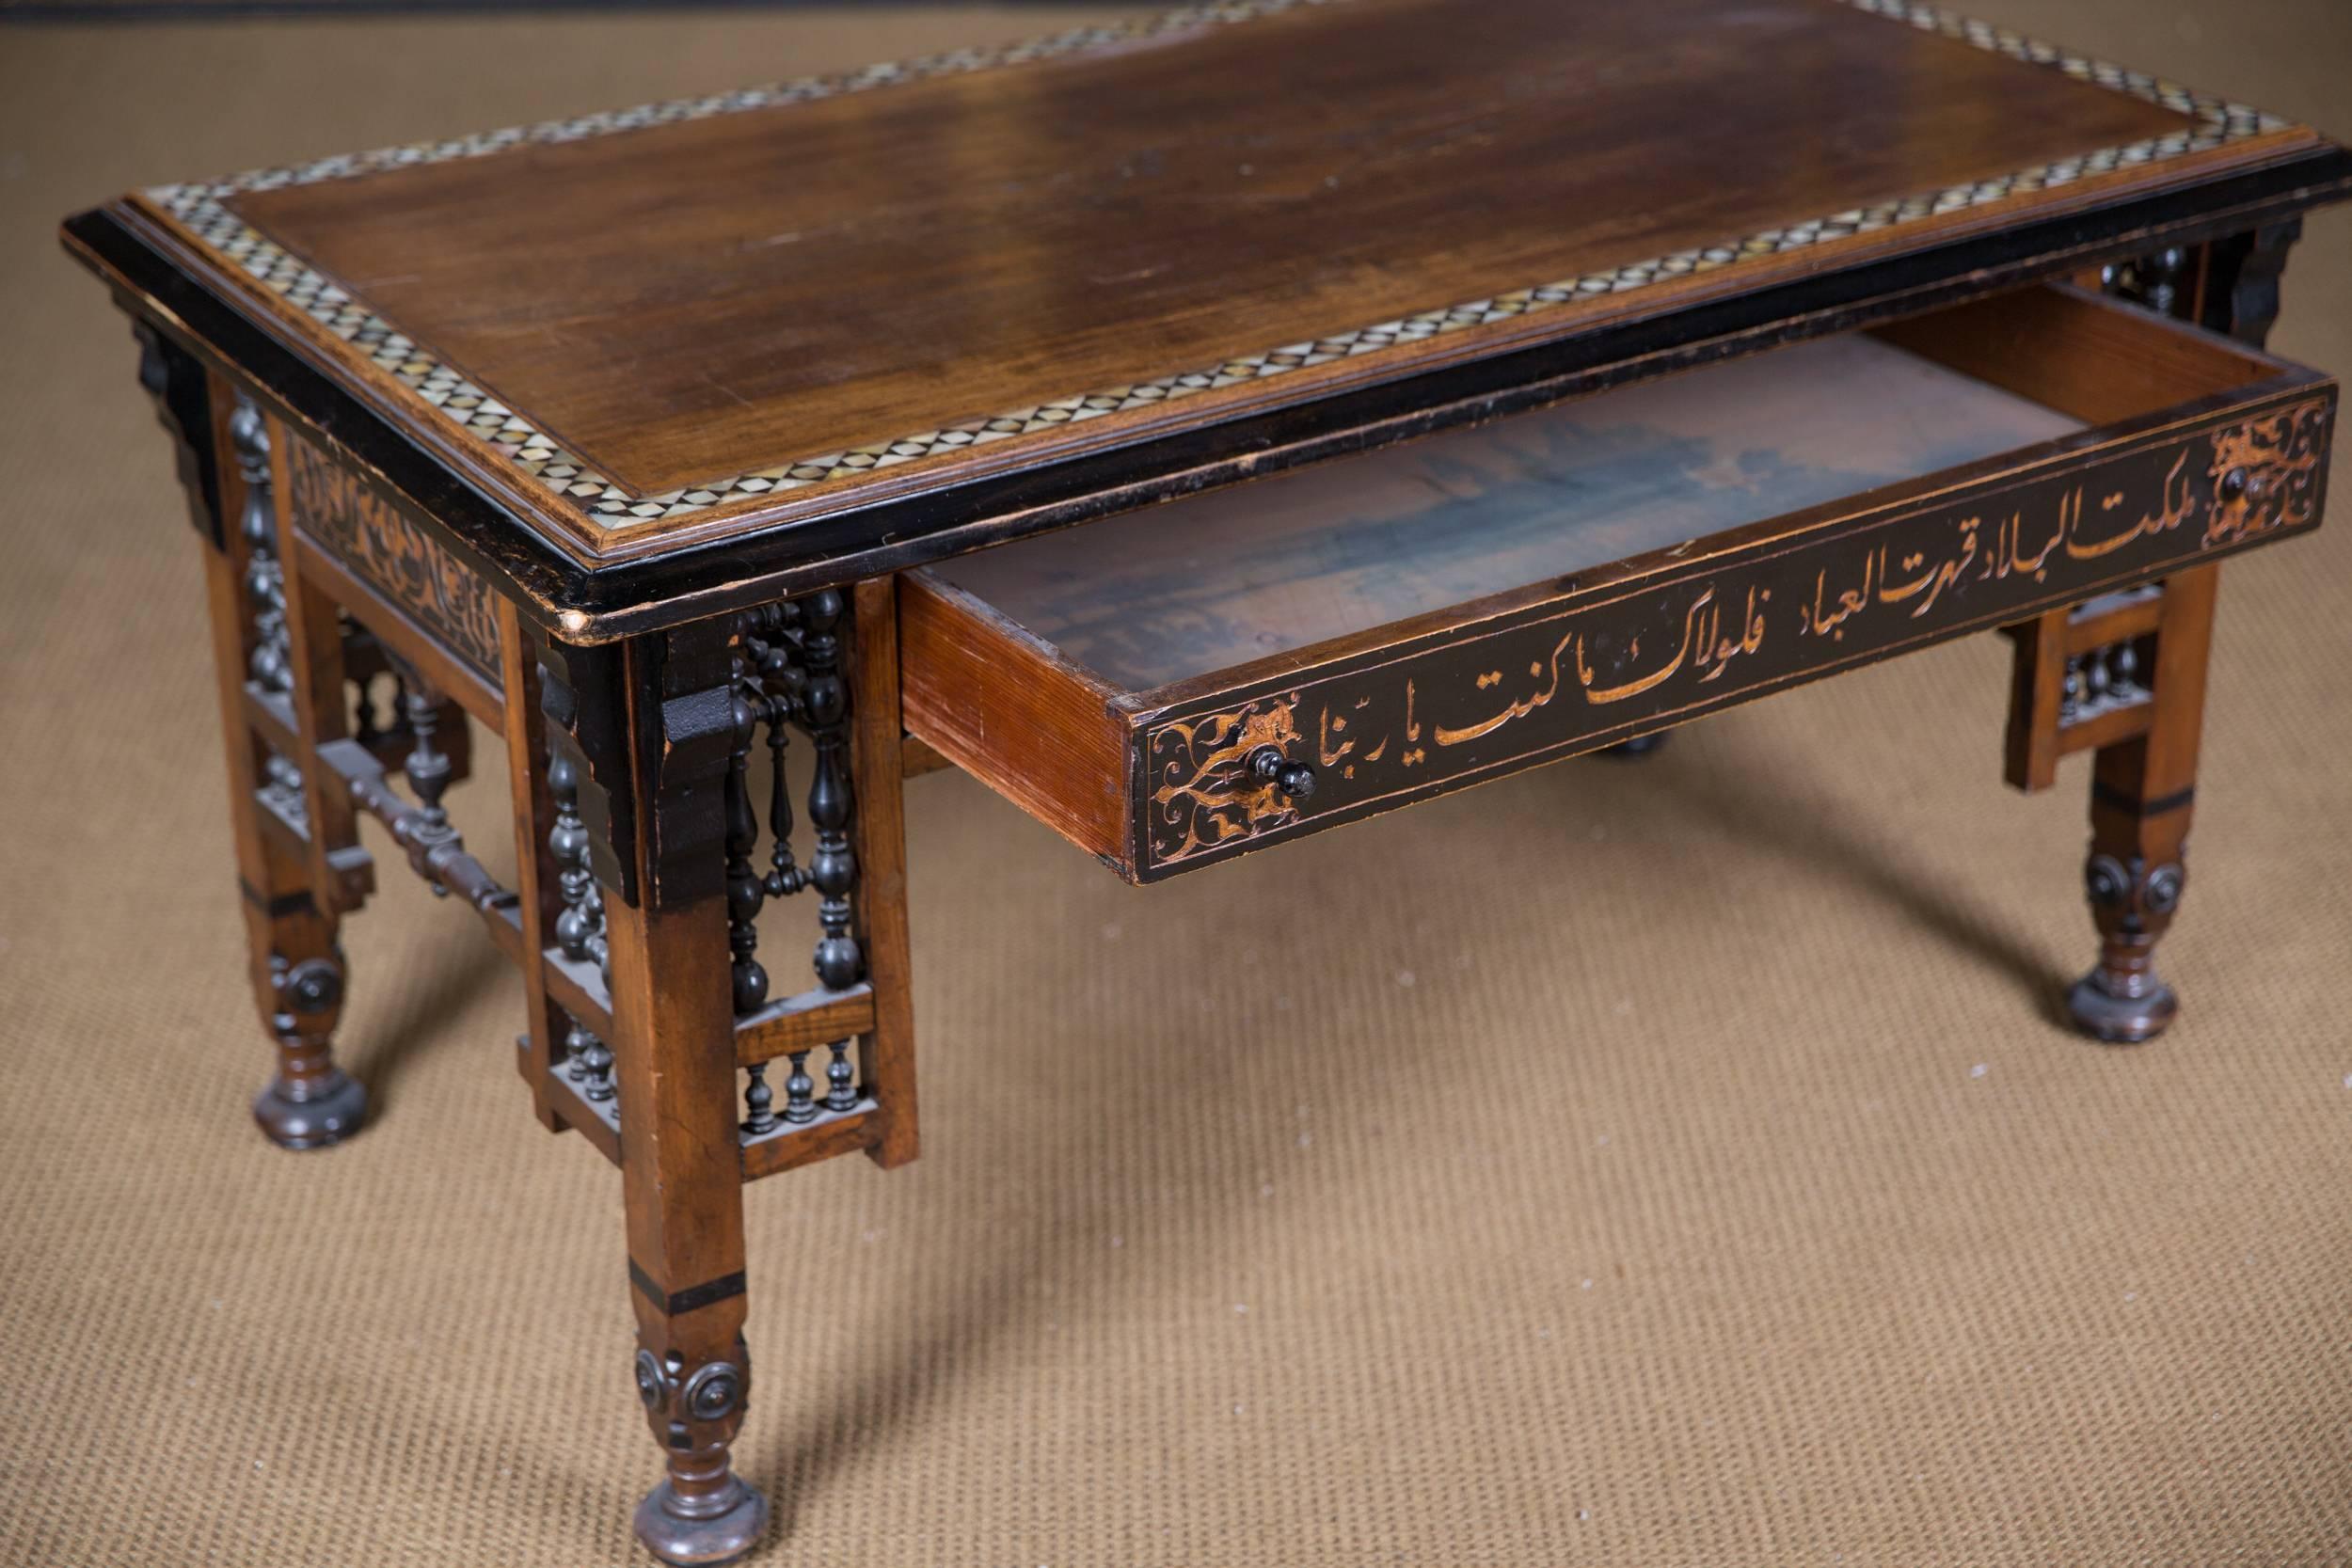 Maghreb 19th Century, Oriental Couch Table with Inlaid Marakesch, circa 1900